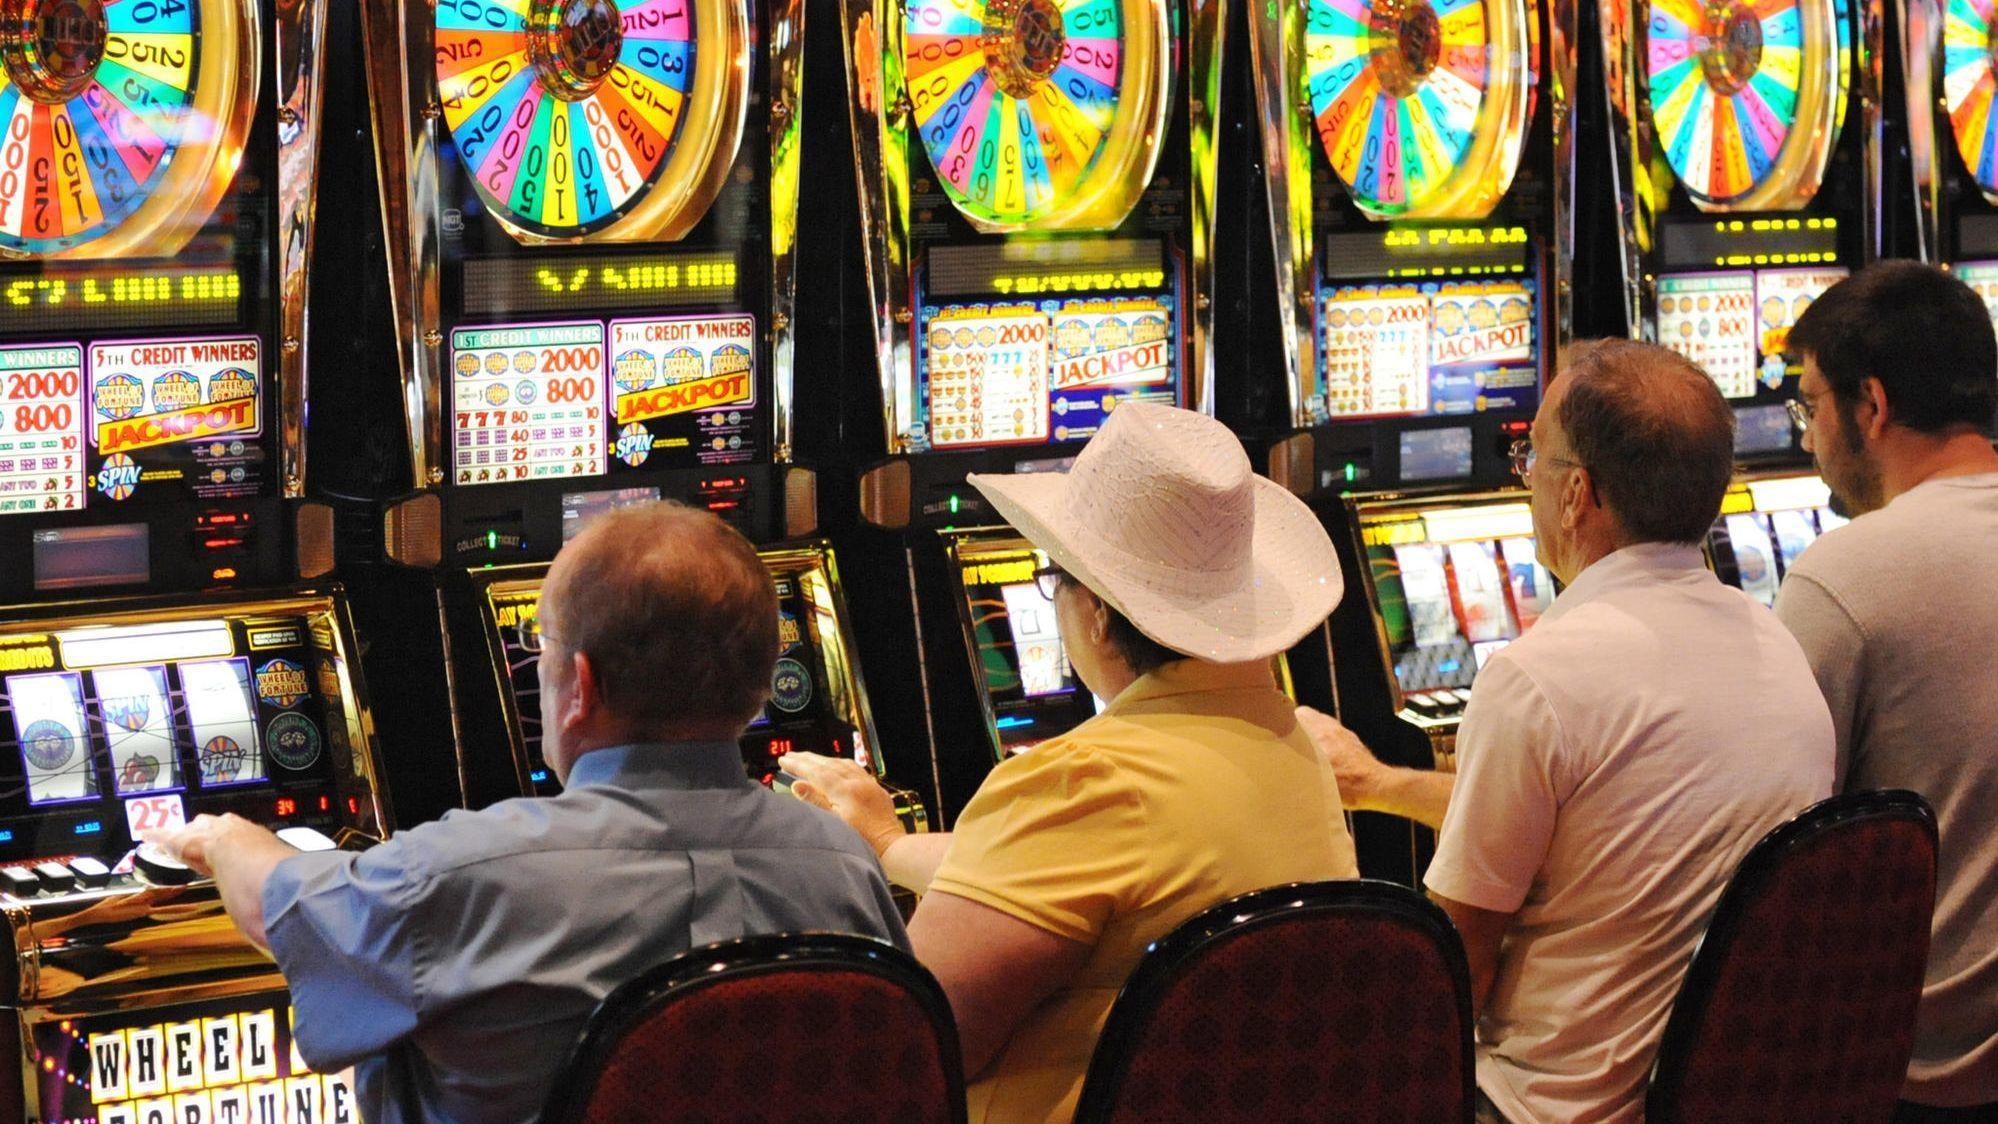 Horse racing, historical slot machines set to expand in Virginia